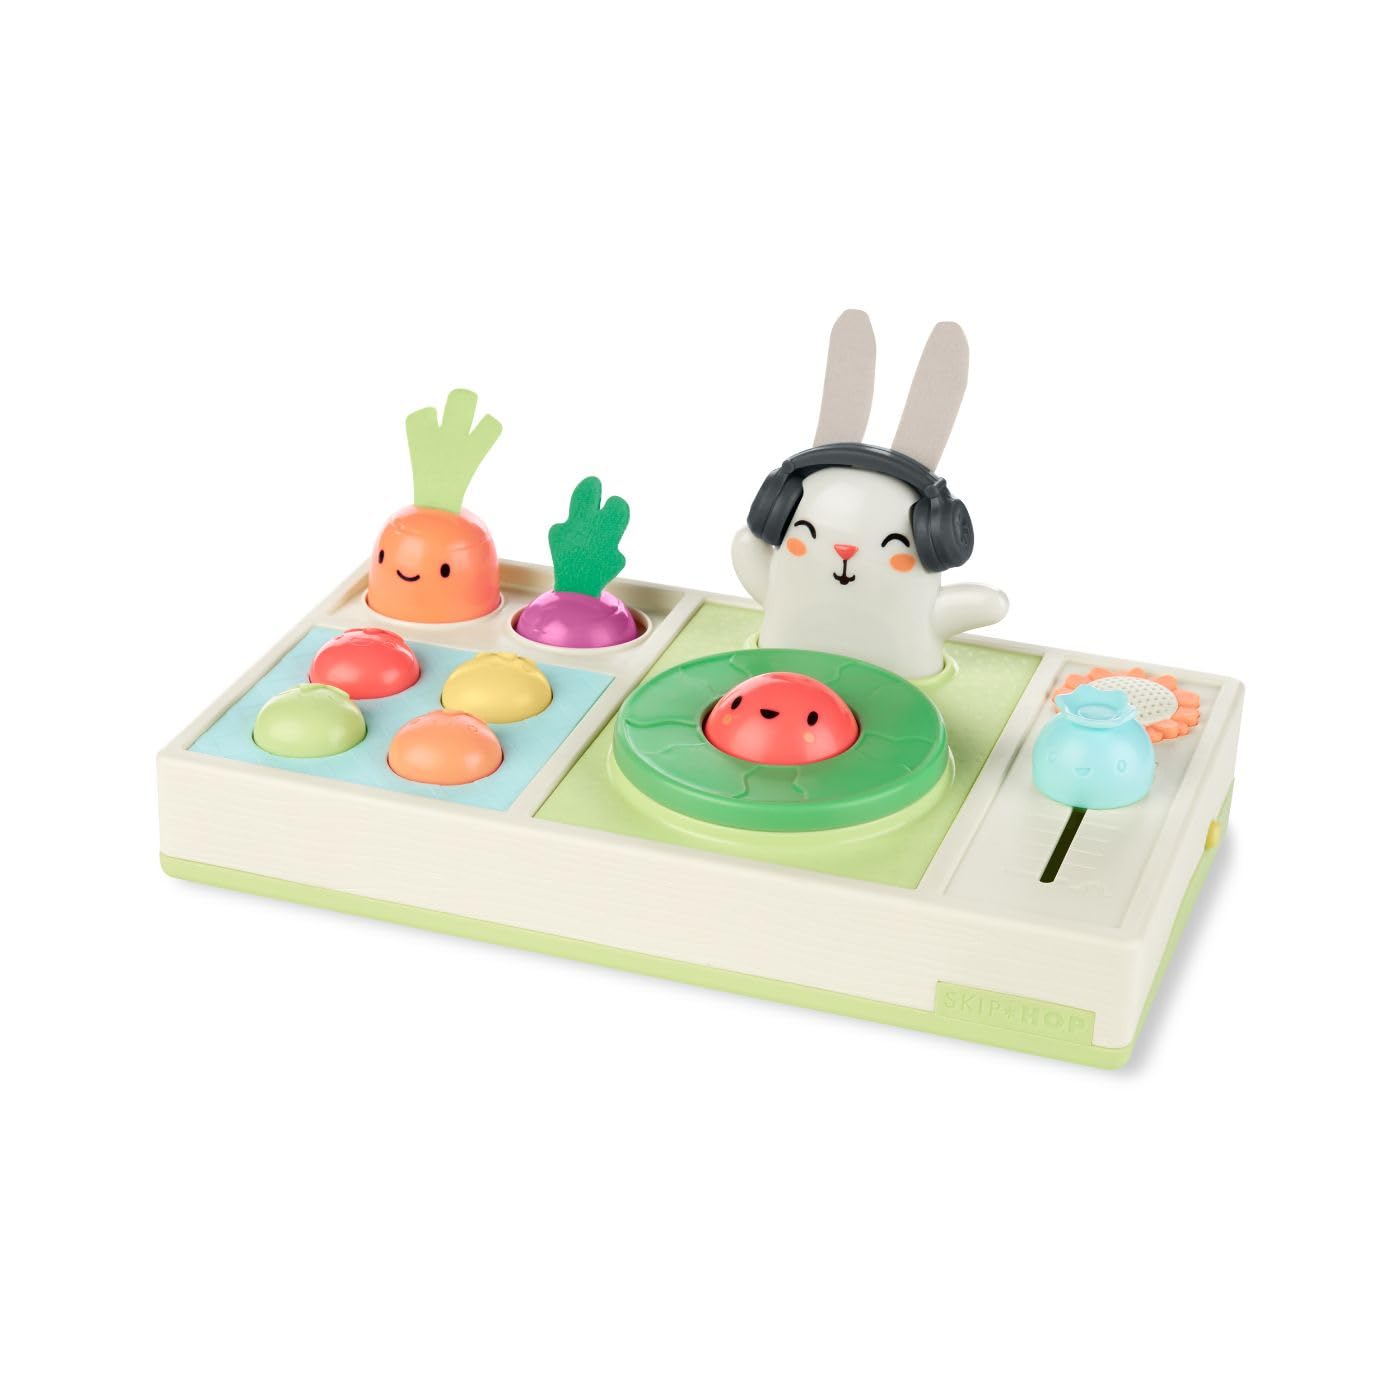 Skip Hop Baby Musical DJ Set Toy with Lights, Songs, Sound Effects, and Soft Textures, Farmstand Let The Beet Drop DJ Set